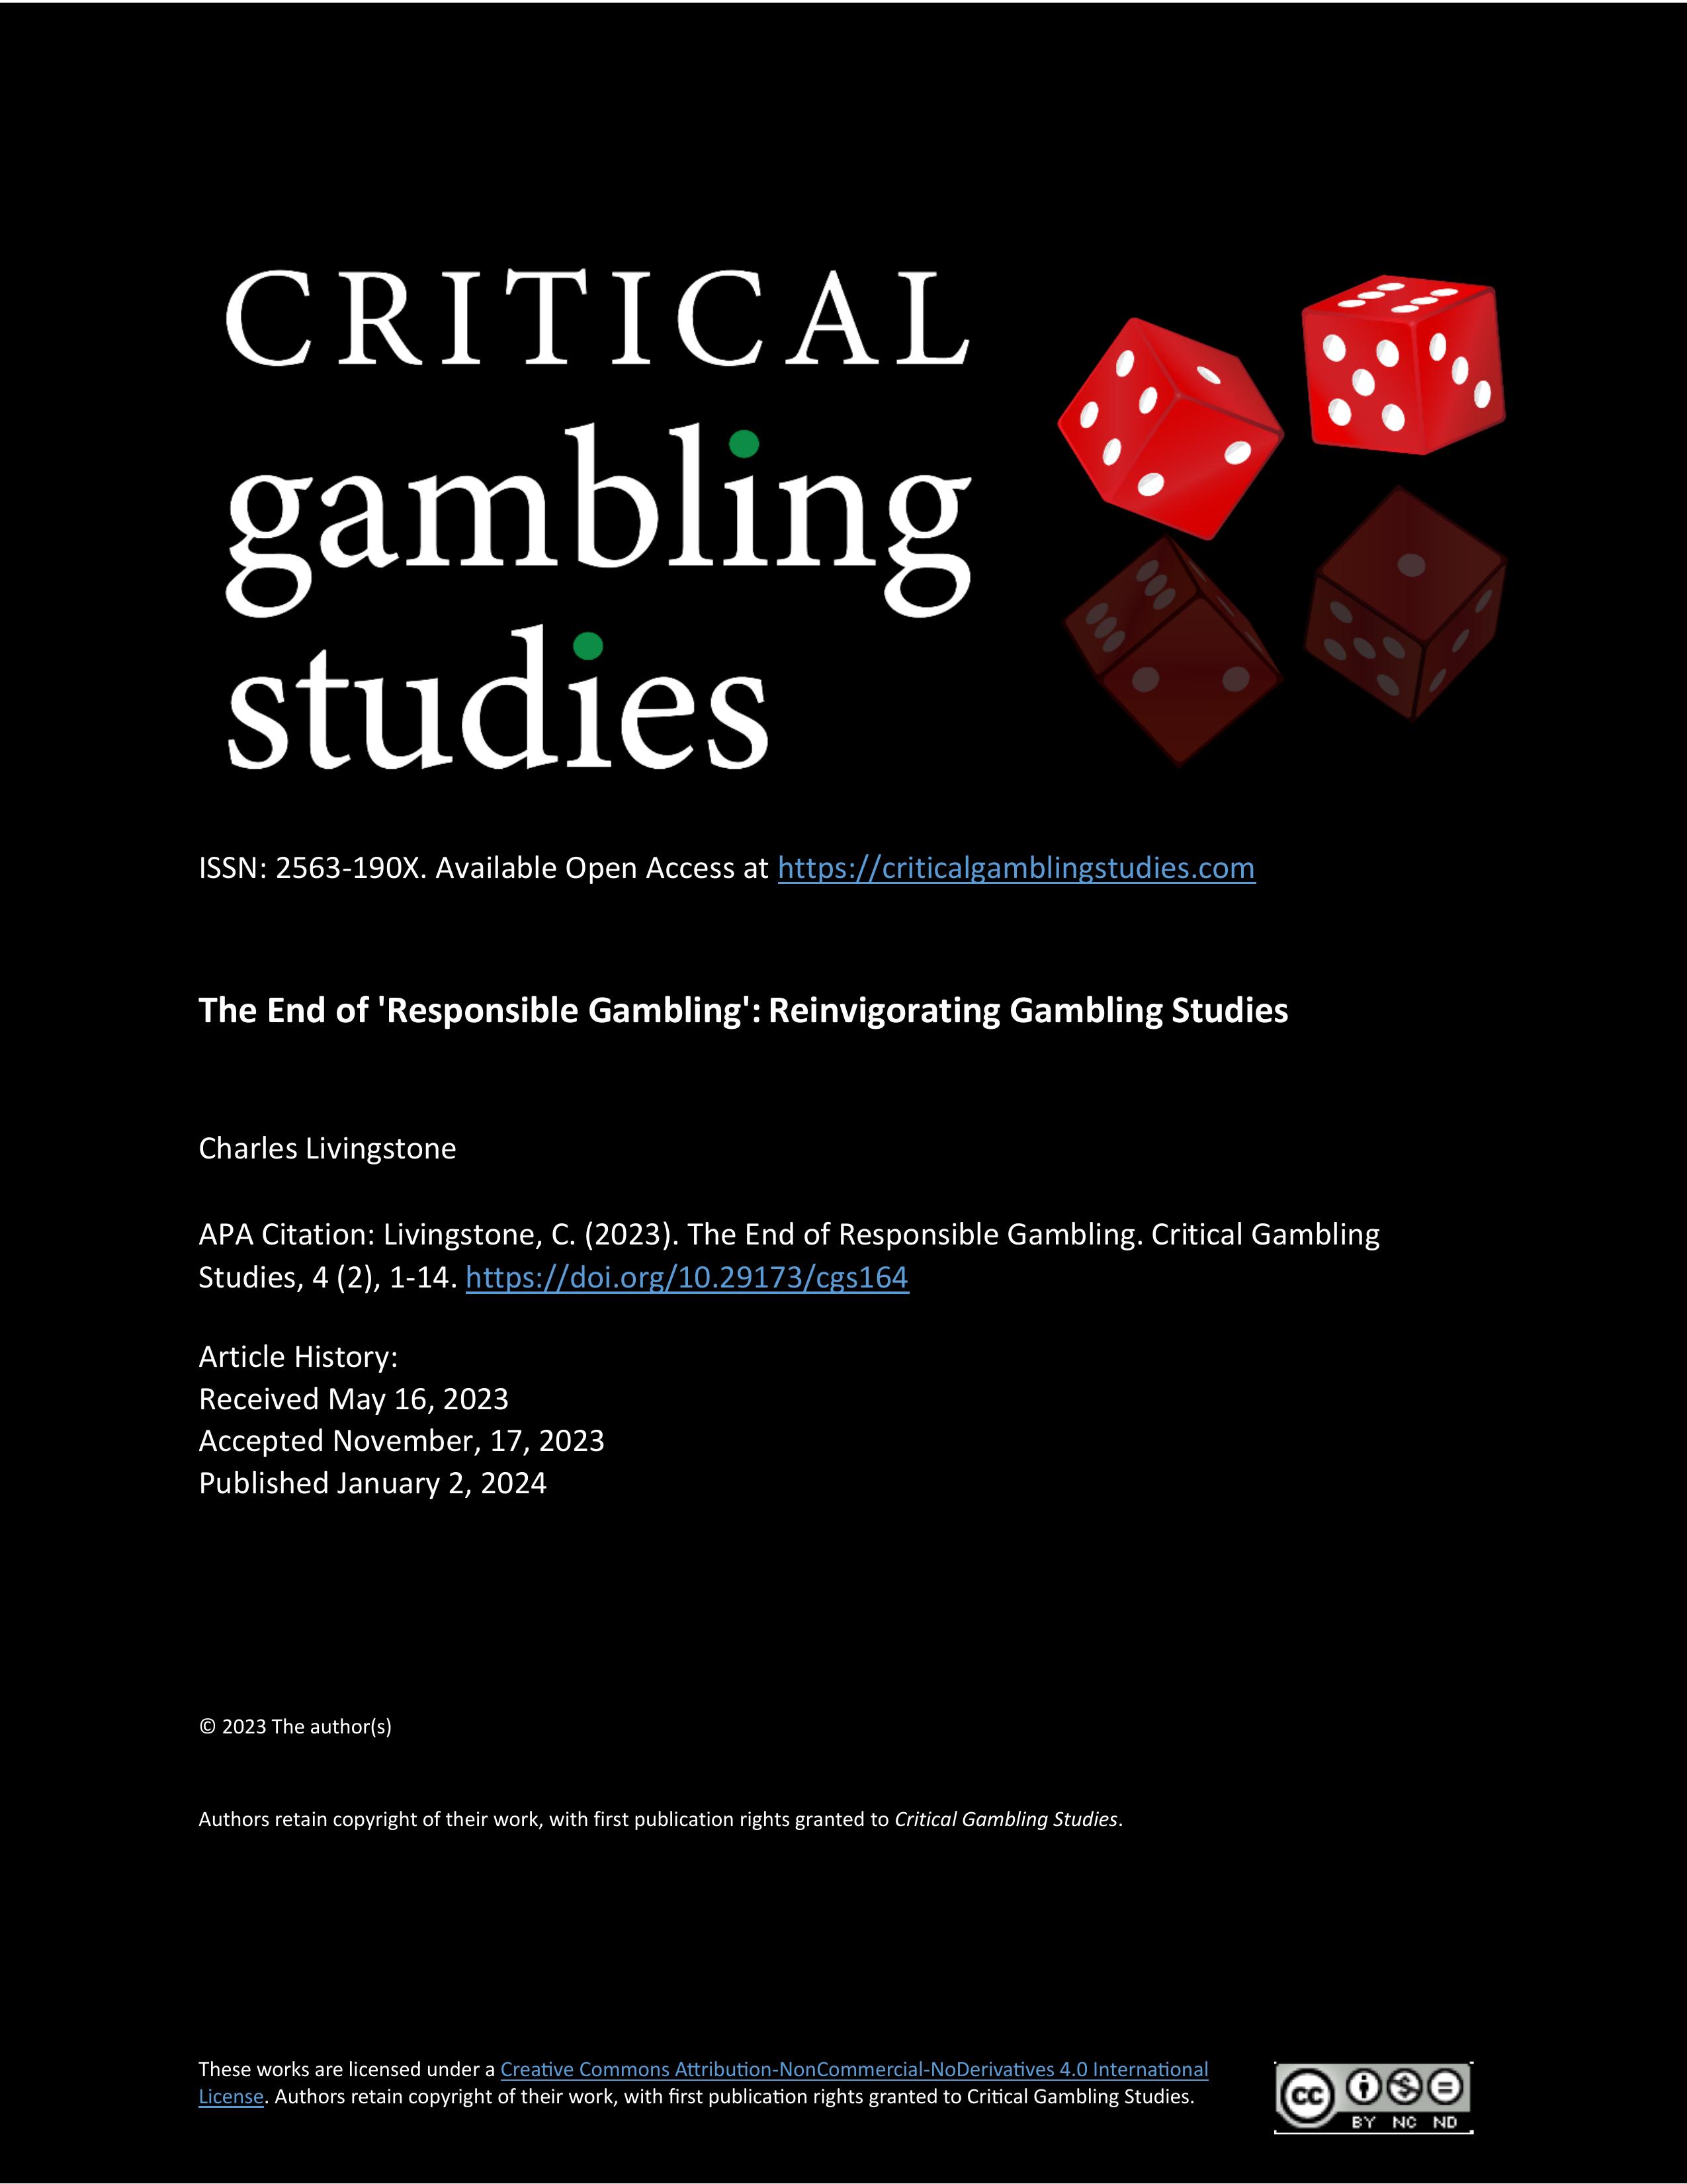 This is the cover page for this article. It shows the title of the journal Critical Gambling Studies, two red dice with white dots for numbers and the title and information of this article.